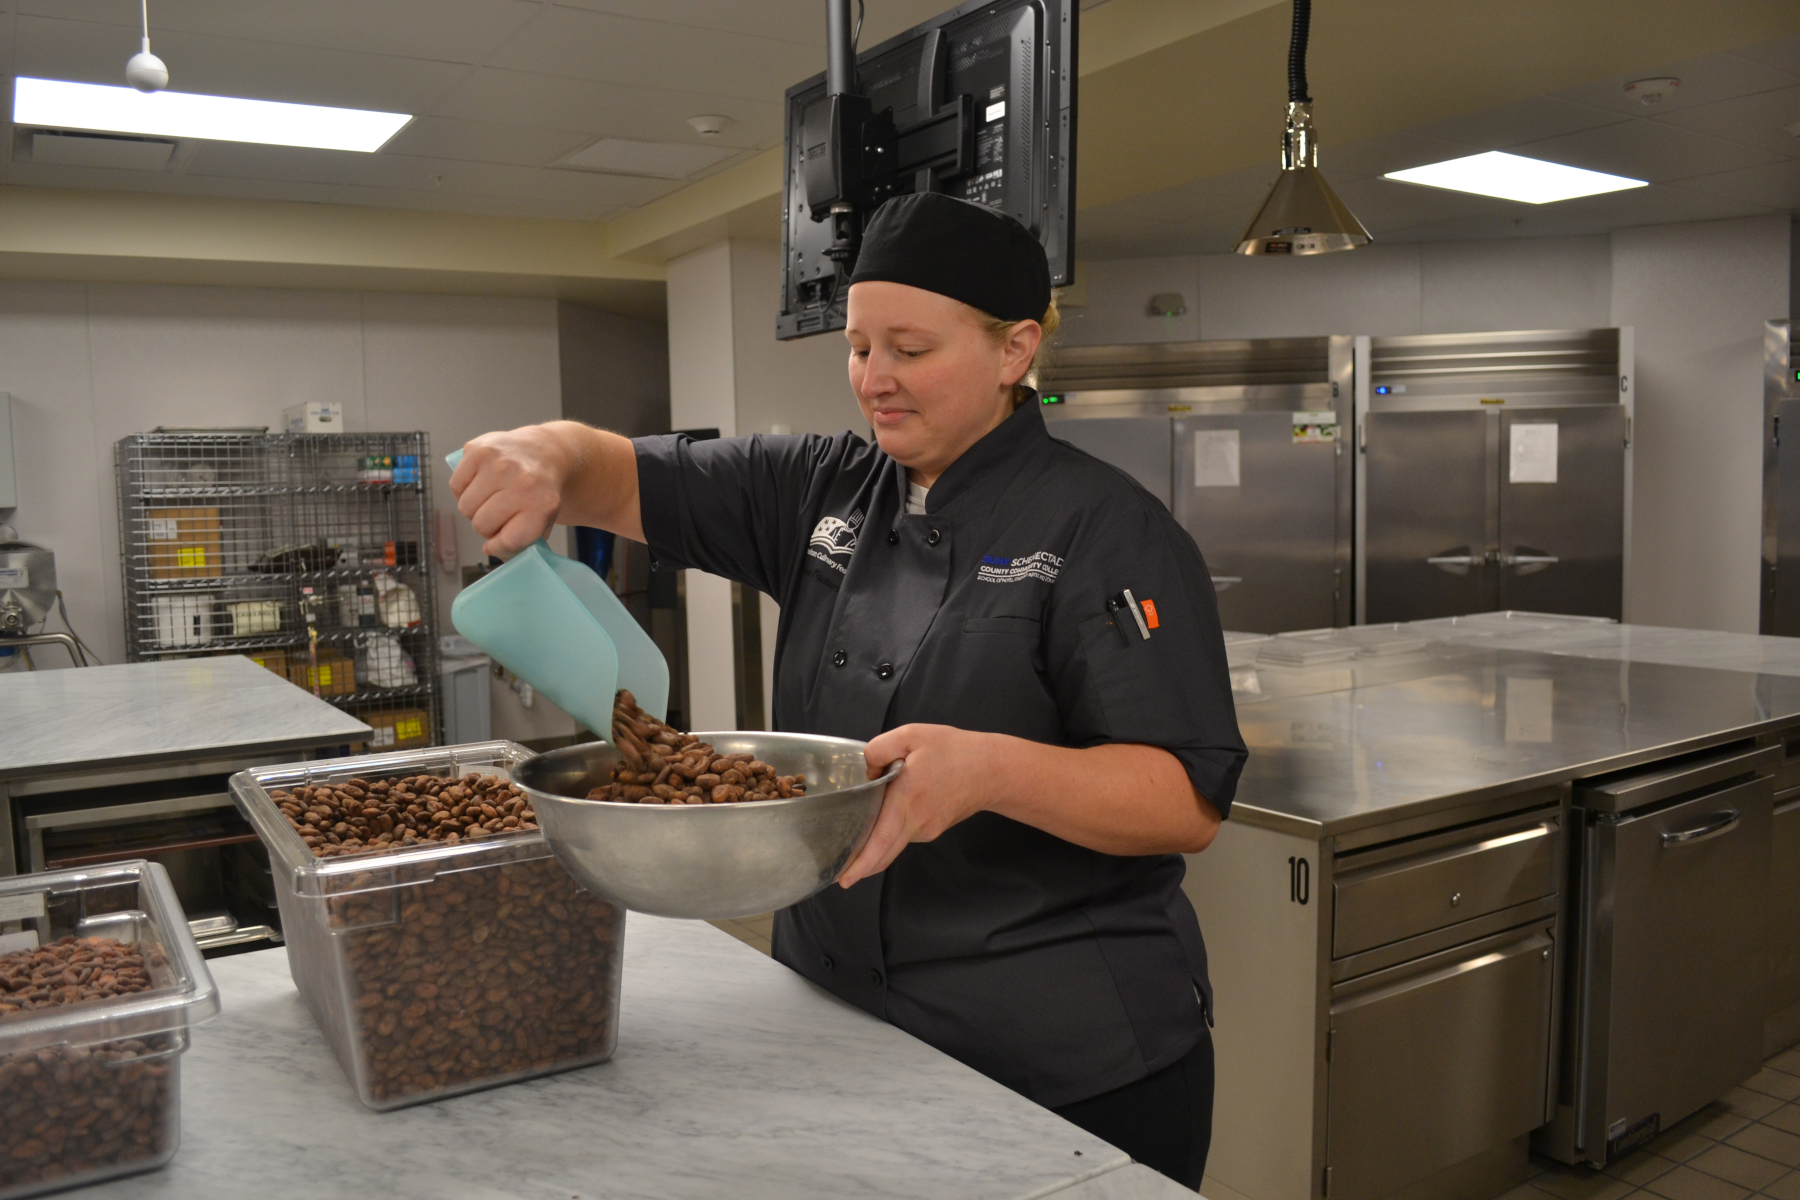 Vaness Traver in new Confection Lab scooping cocoa beans into bowl